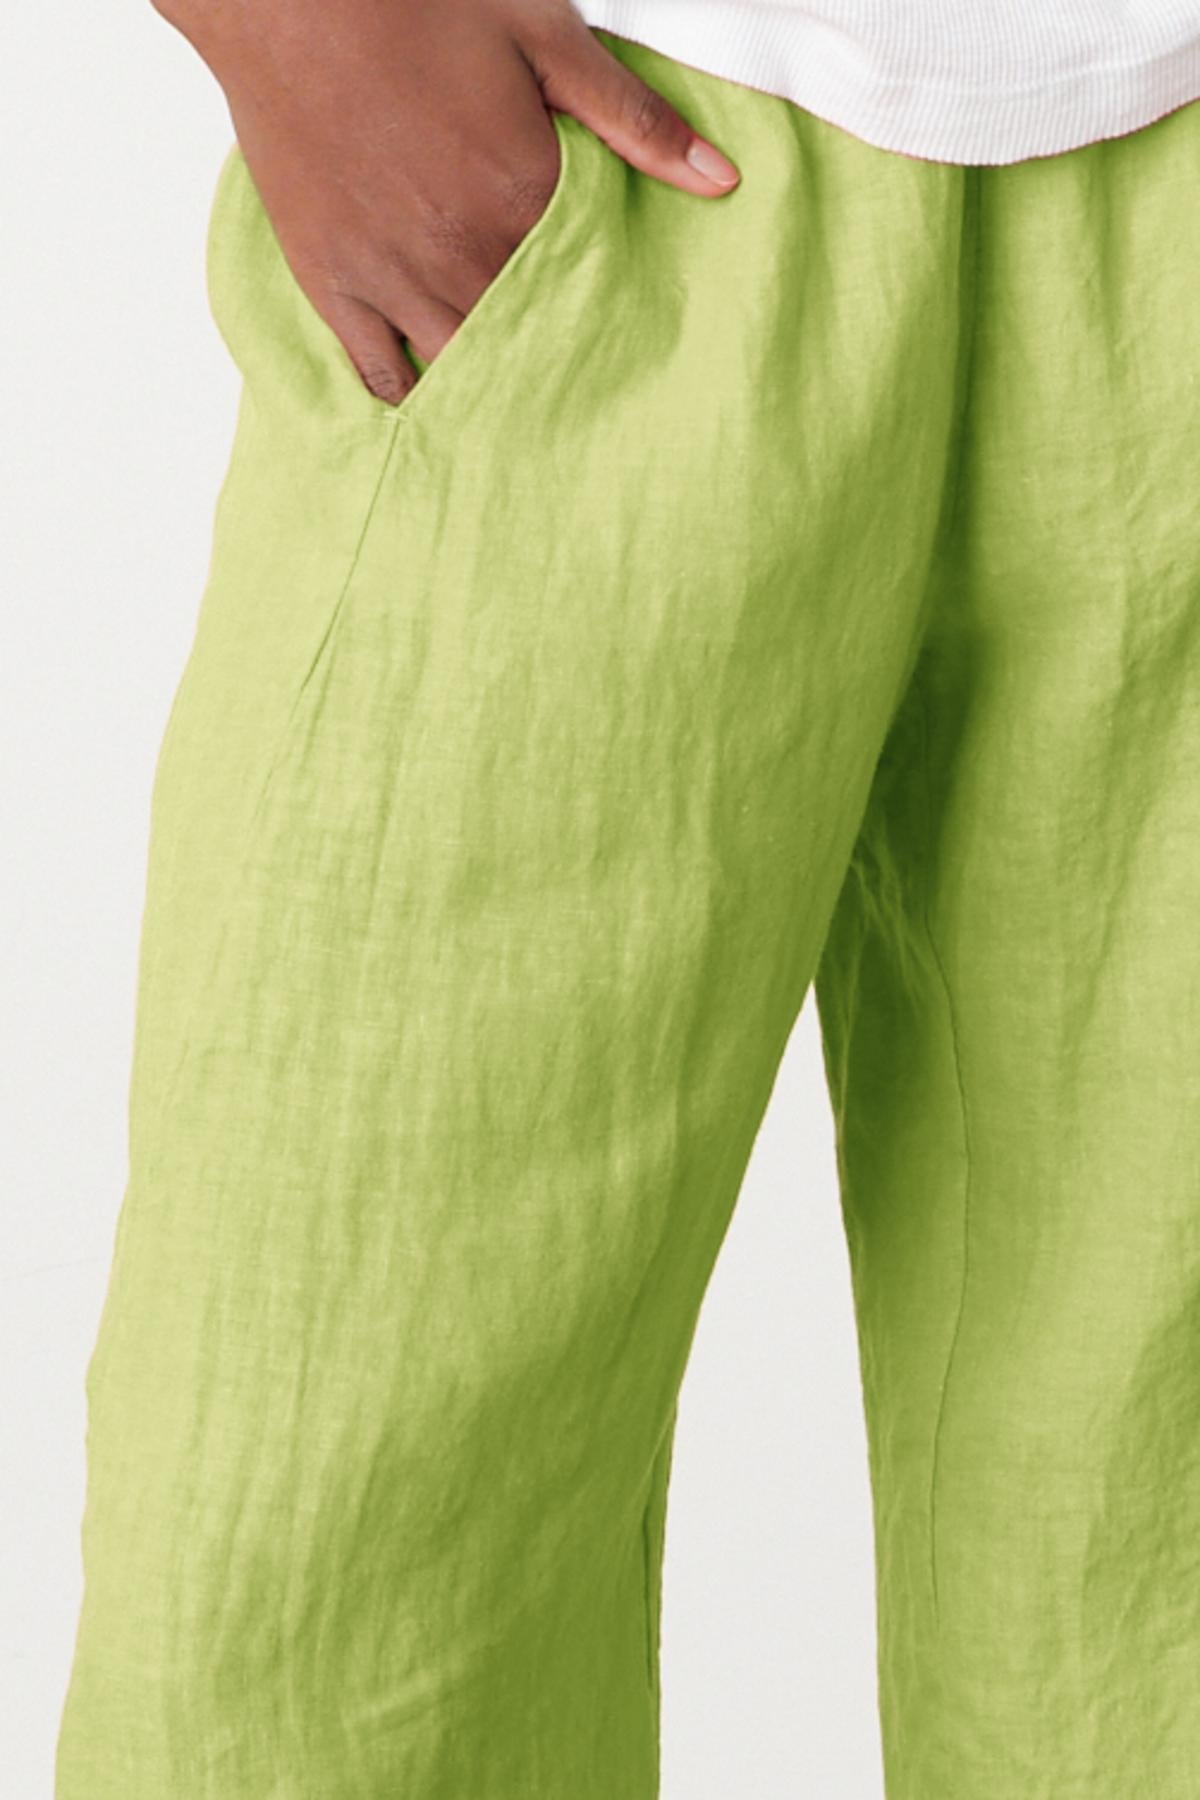 Lola pant in kiwi green colored linen close up front and pocket detail-35206342049985